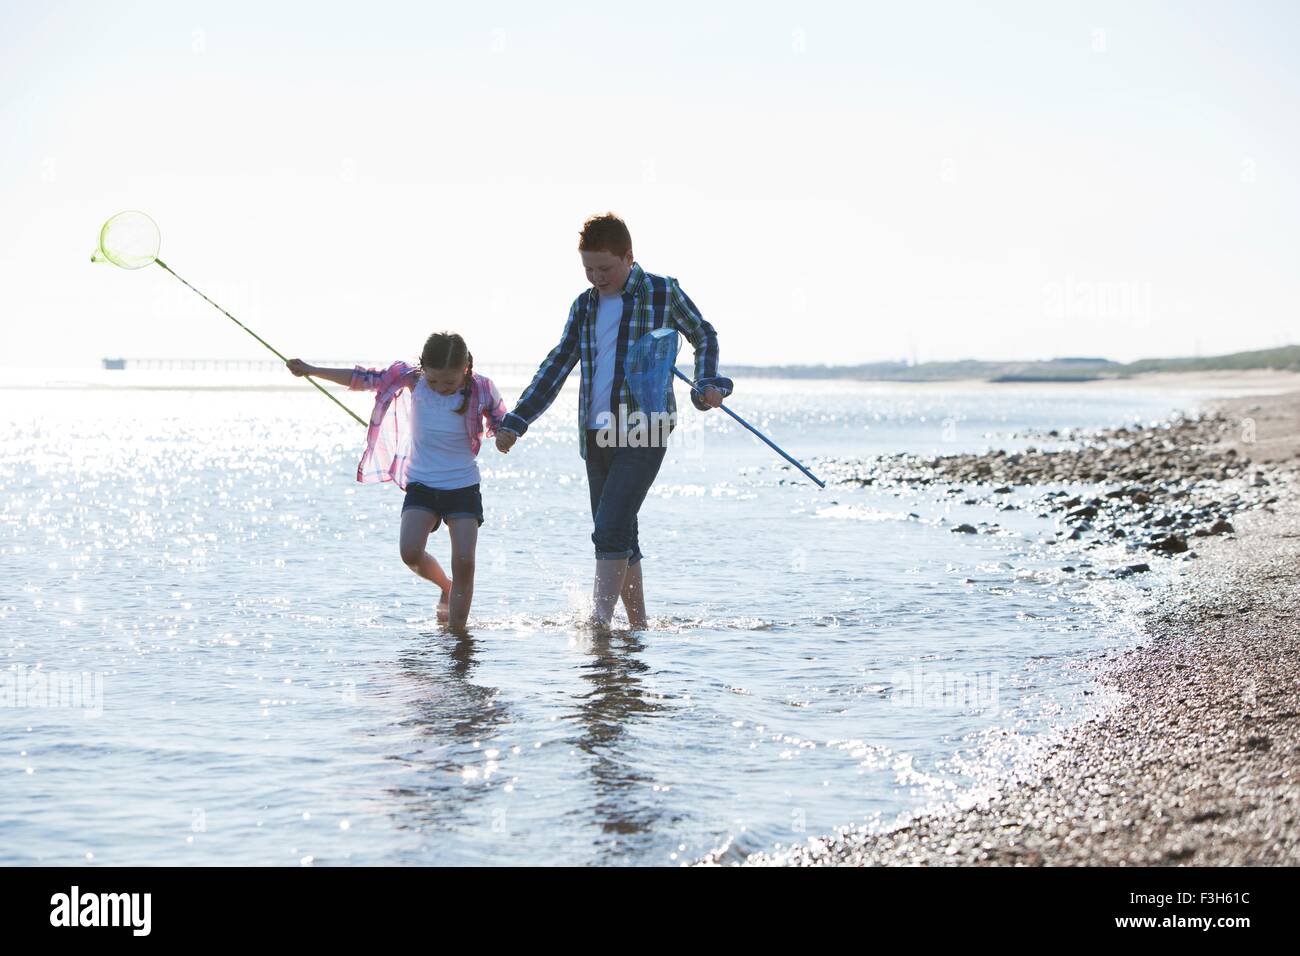 Girl and boy paddling in water holding hands, carrying fishing nets, looking down Stock Photo